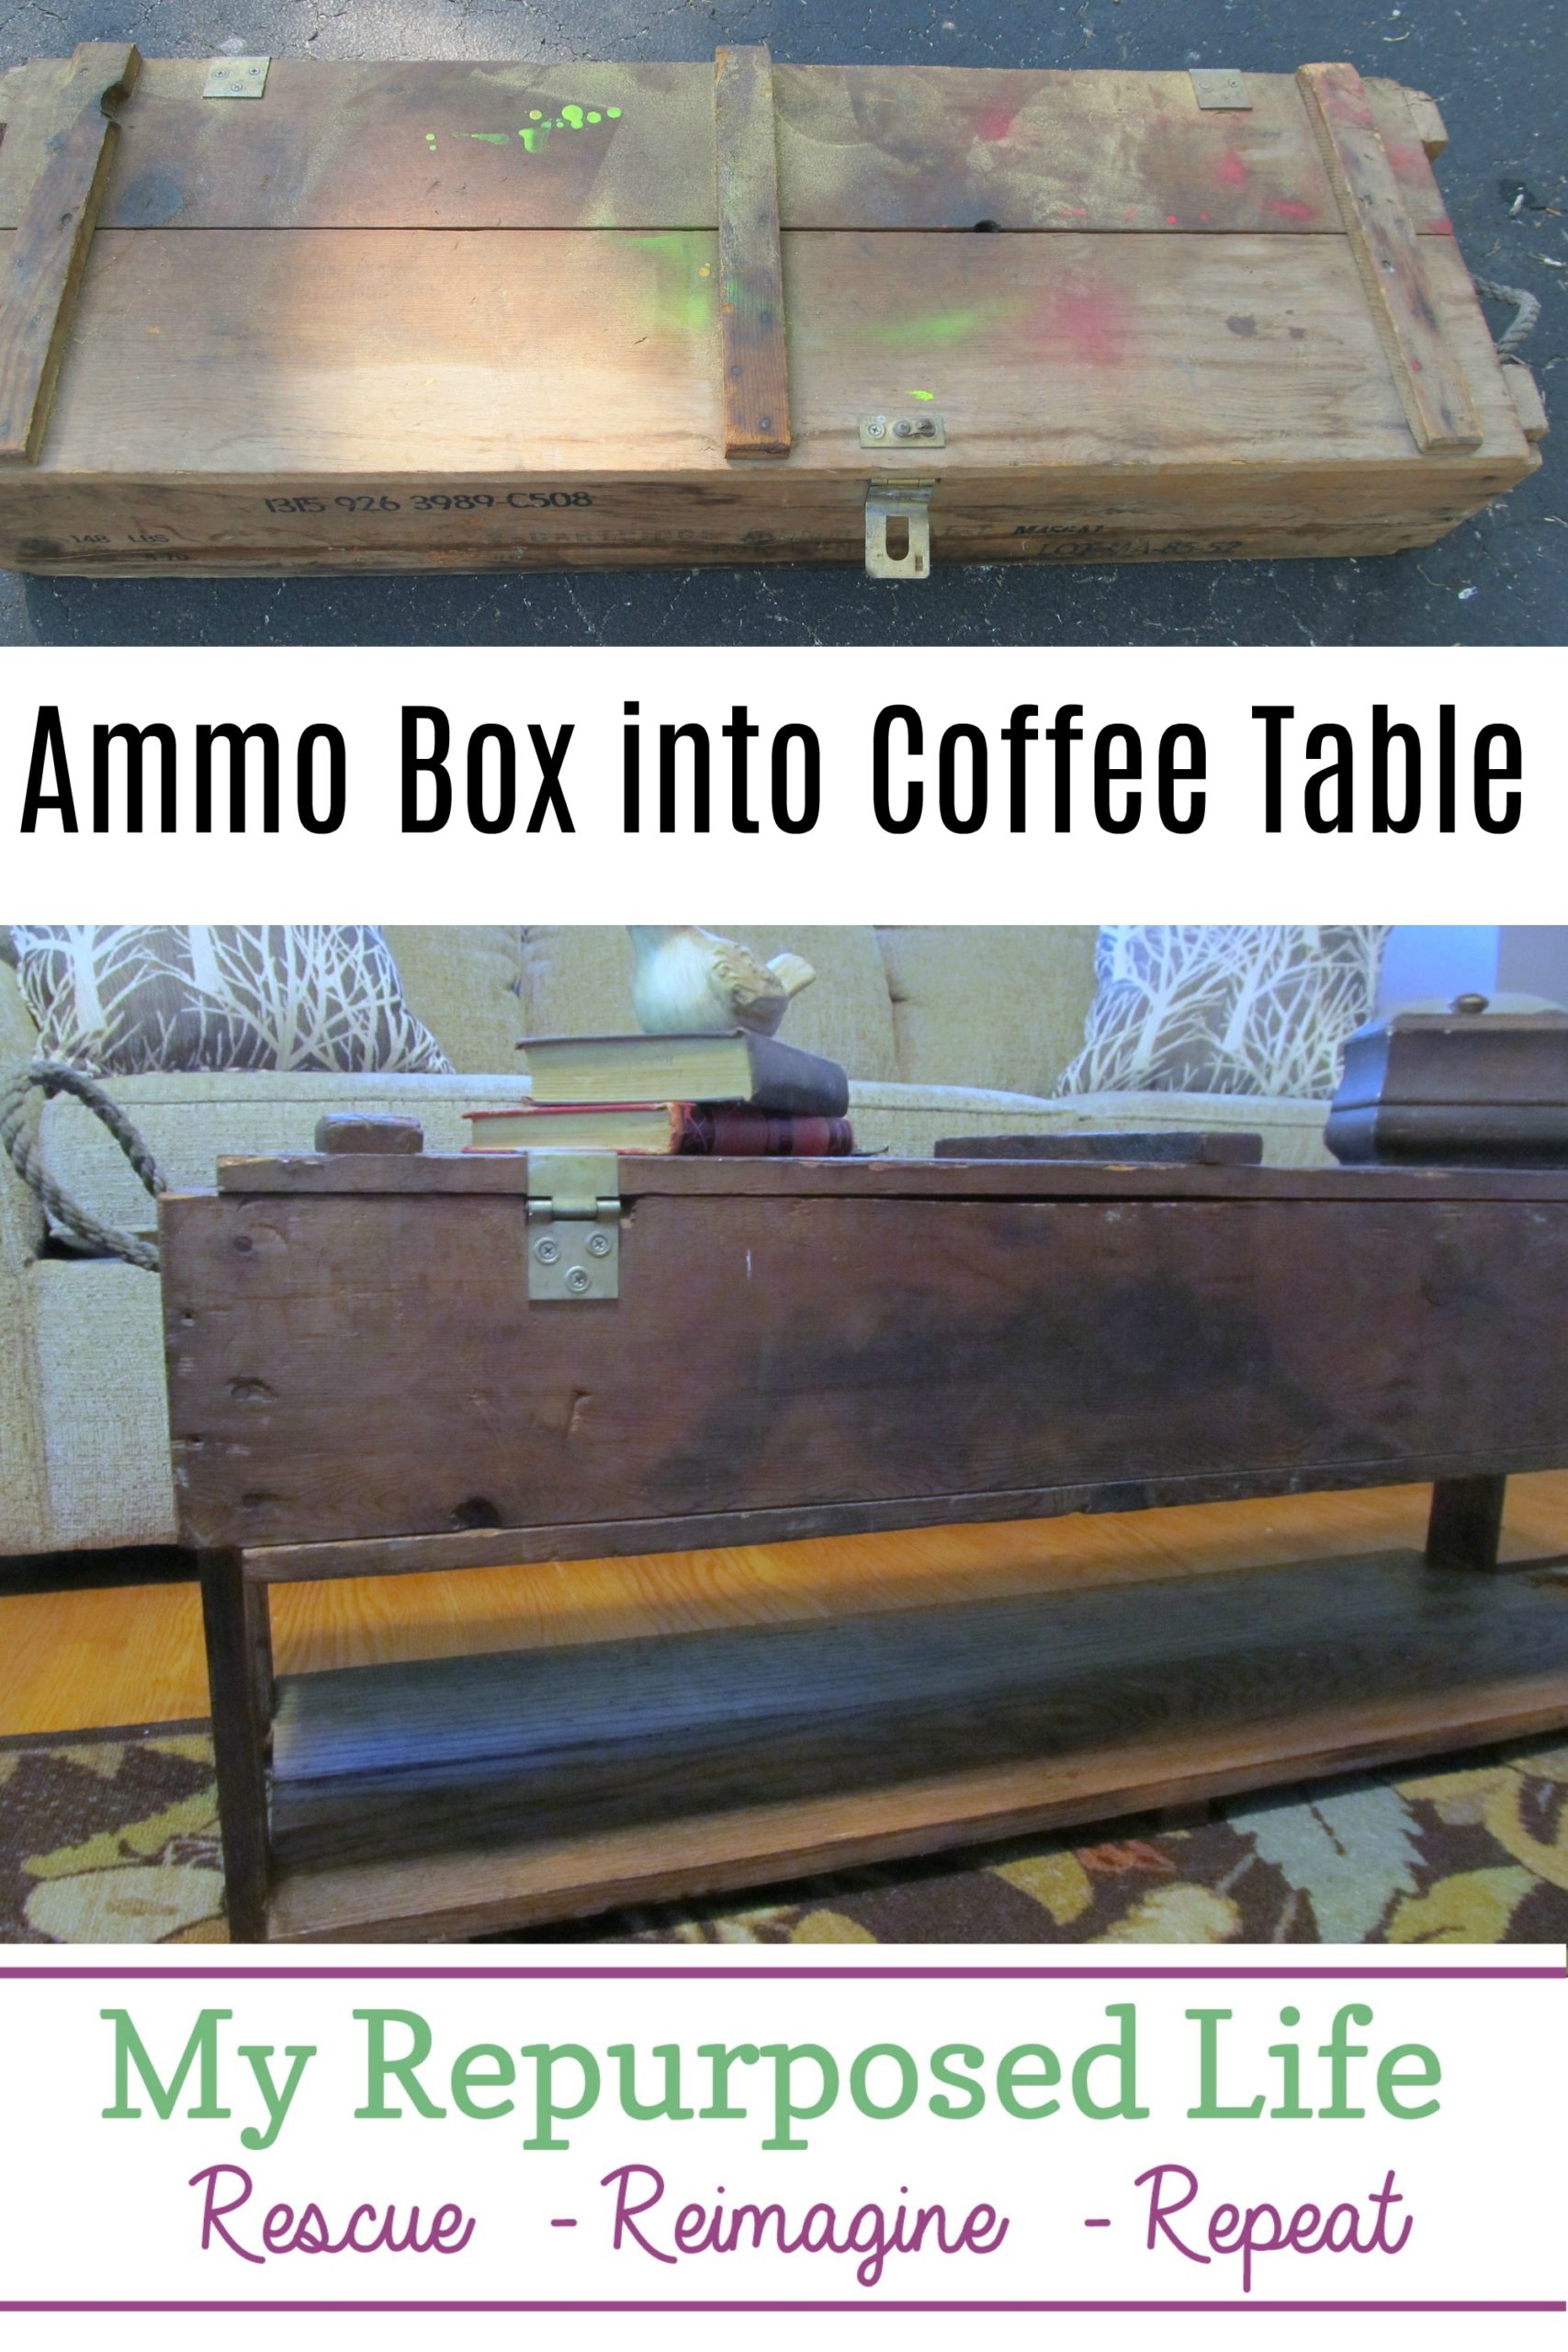 How to turn a vintage ammo box into a unique coffee table with a bottom shelf and lots of storage area. Lots of pictures in this DIY tutorial. If you have something similar, you can easily pull this project off! #MyRepurposedLife #vintage #ammobox #diy #coffeetable #doityourself #project via @repurposedlife